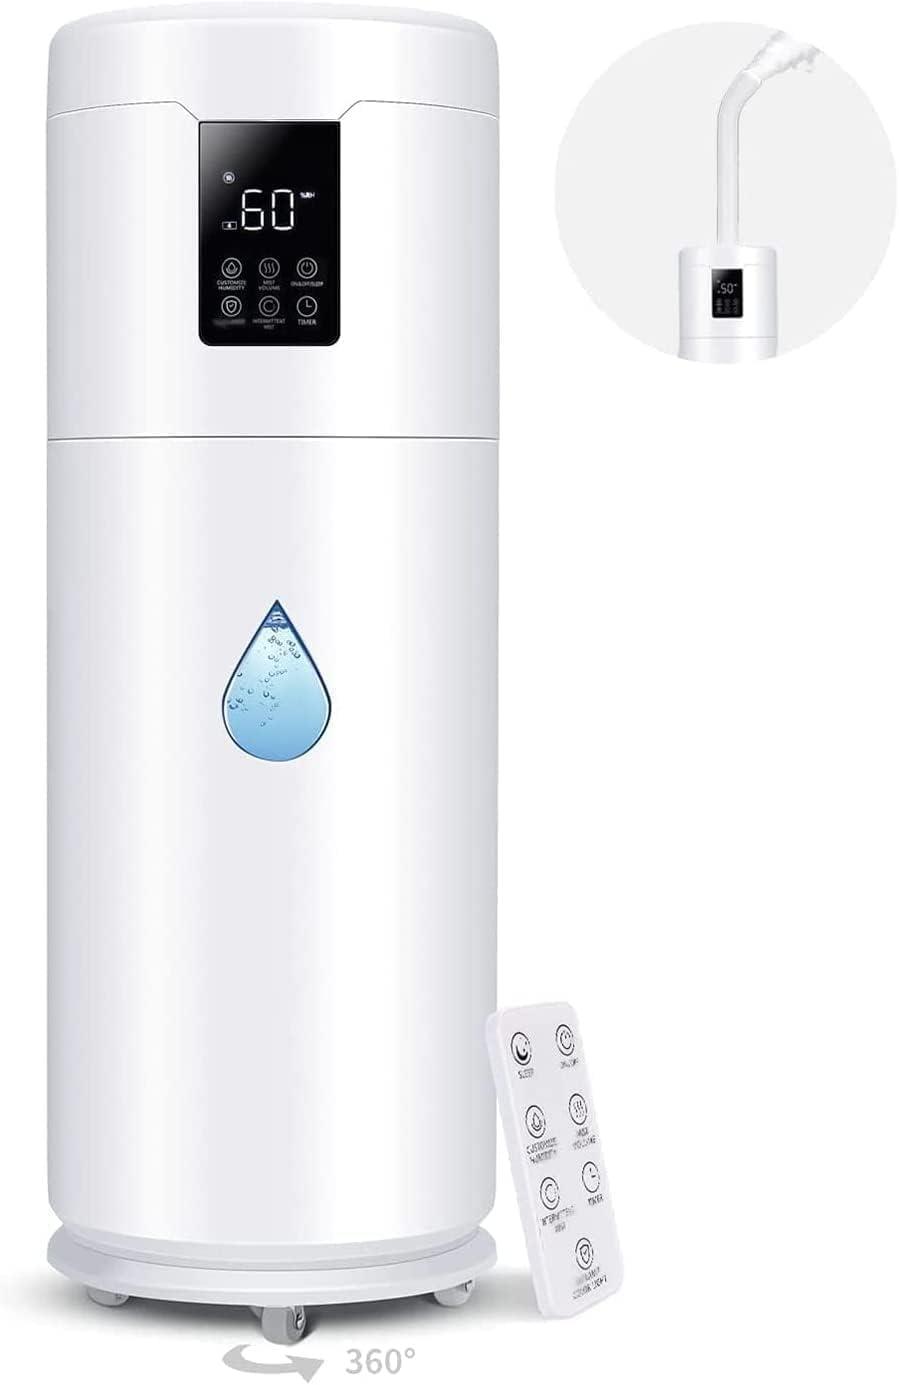 Humidifier for Large Room Home Bedroom 2000 sq.ft. 17L/4.5Gal, Retail $200.00